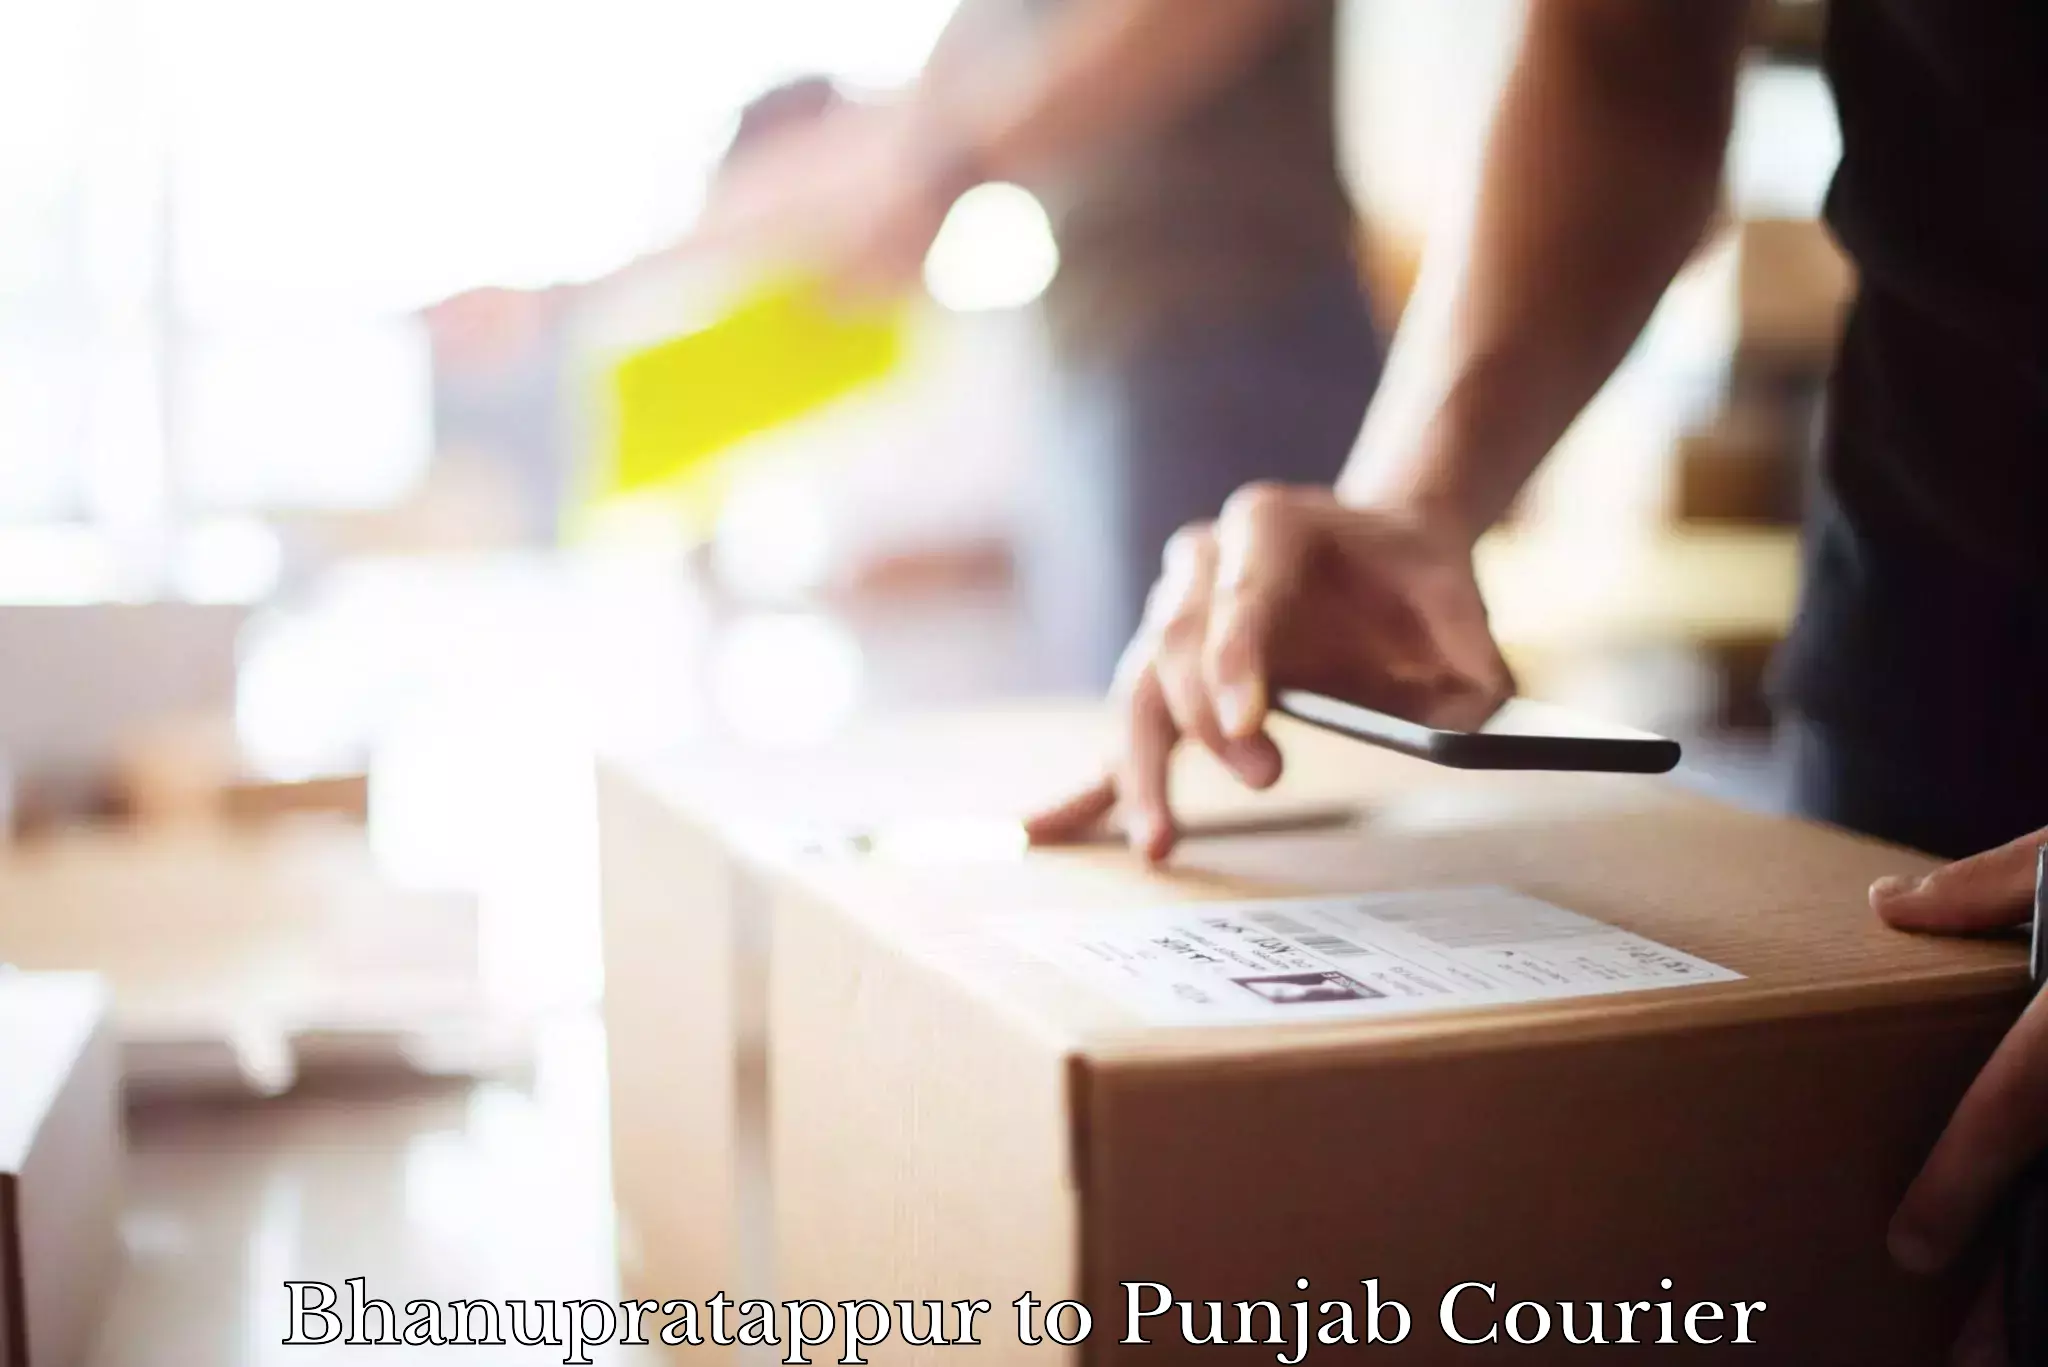 Expedited shipping methods Bhanupratappur to Pathankot